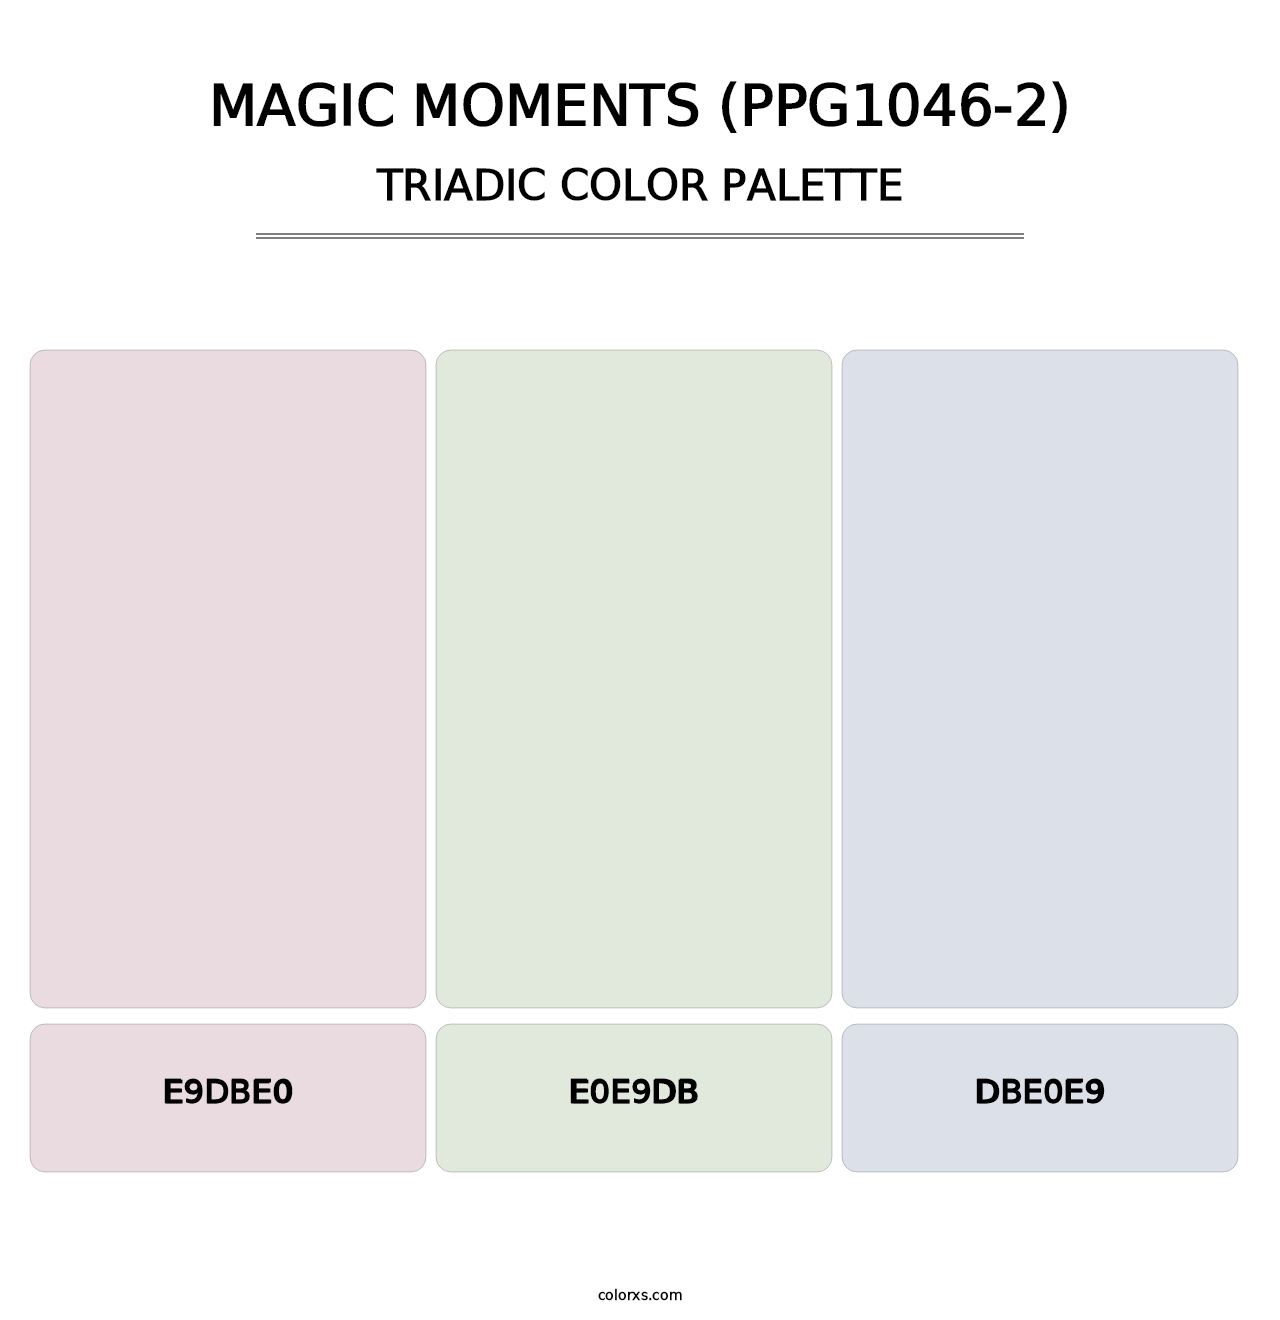 Magic Moments (PPG1046-2) - Triadic Color Palette